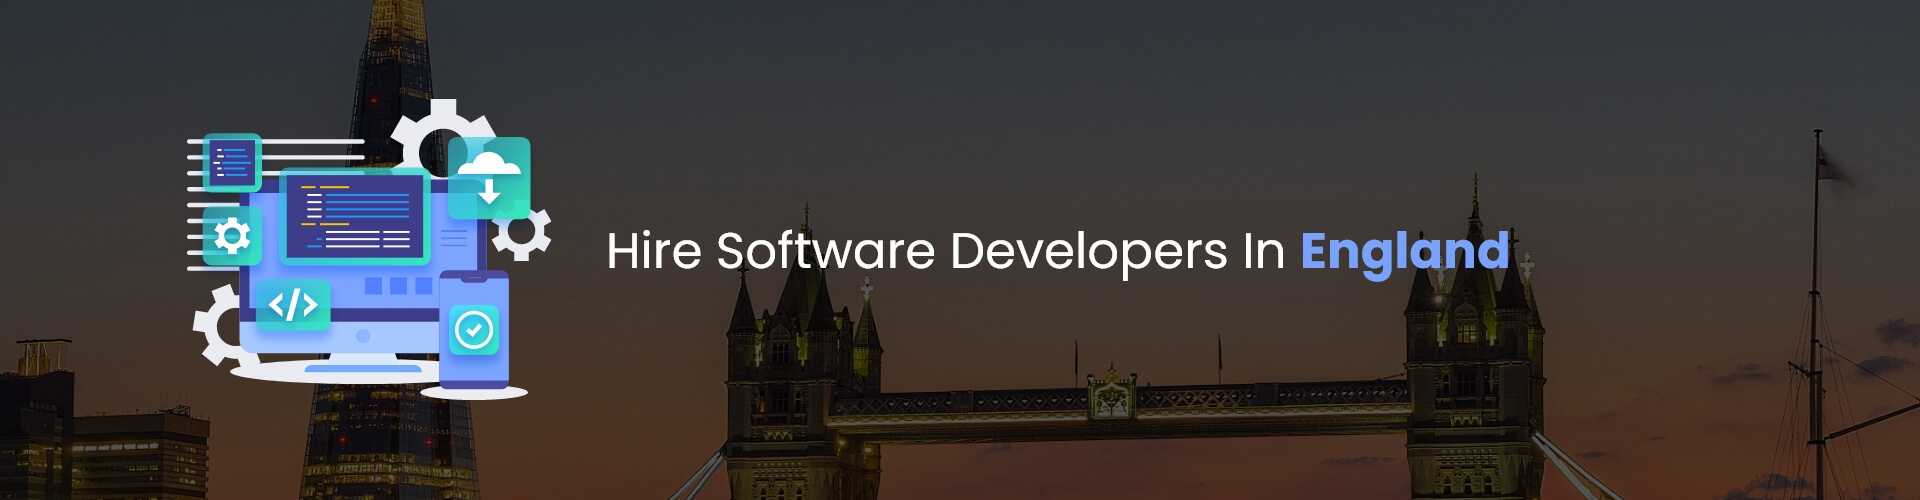 hire software developers in england